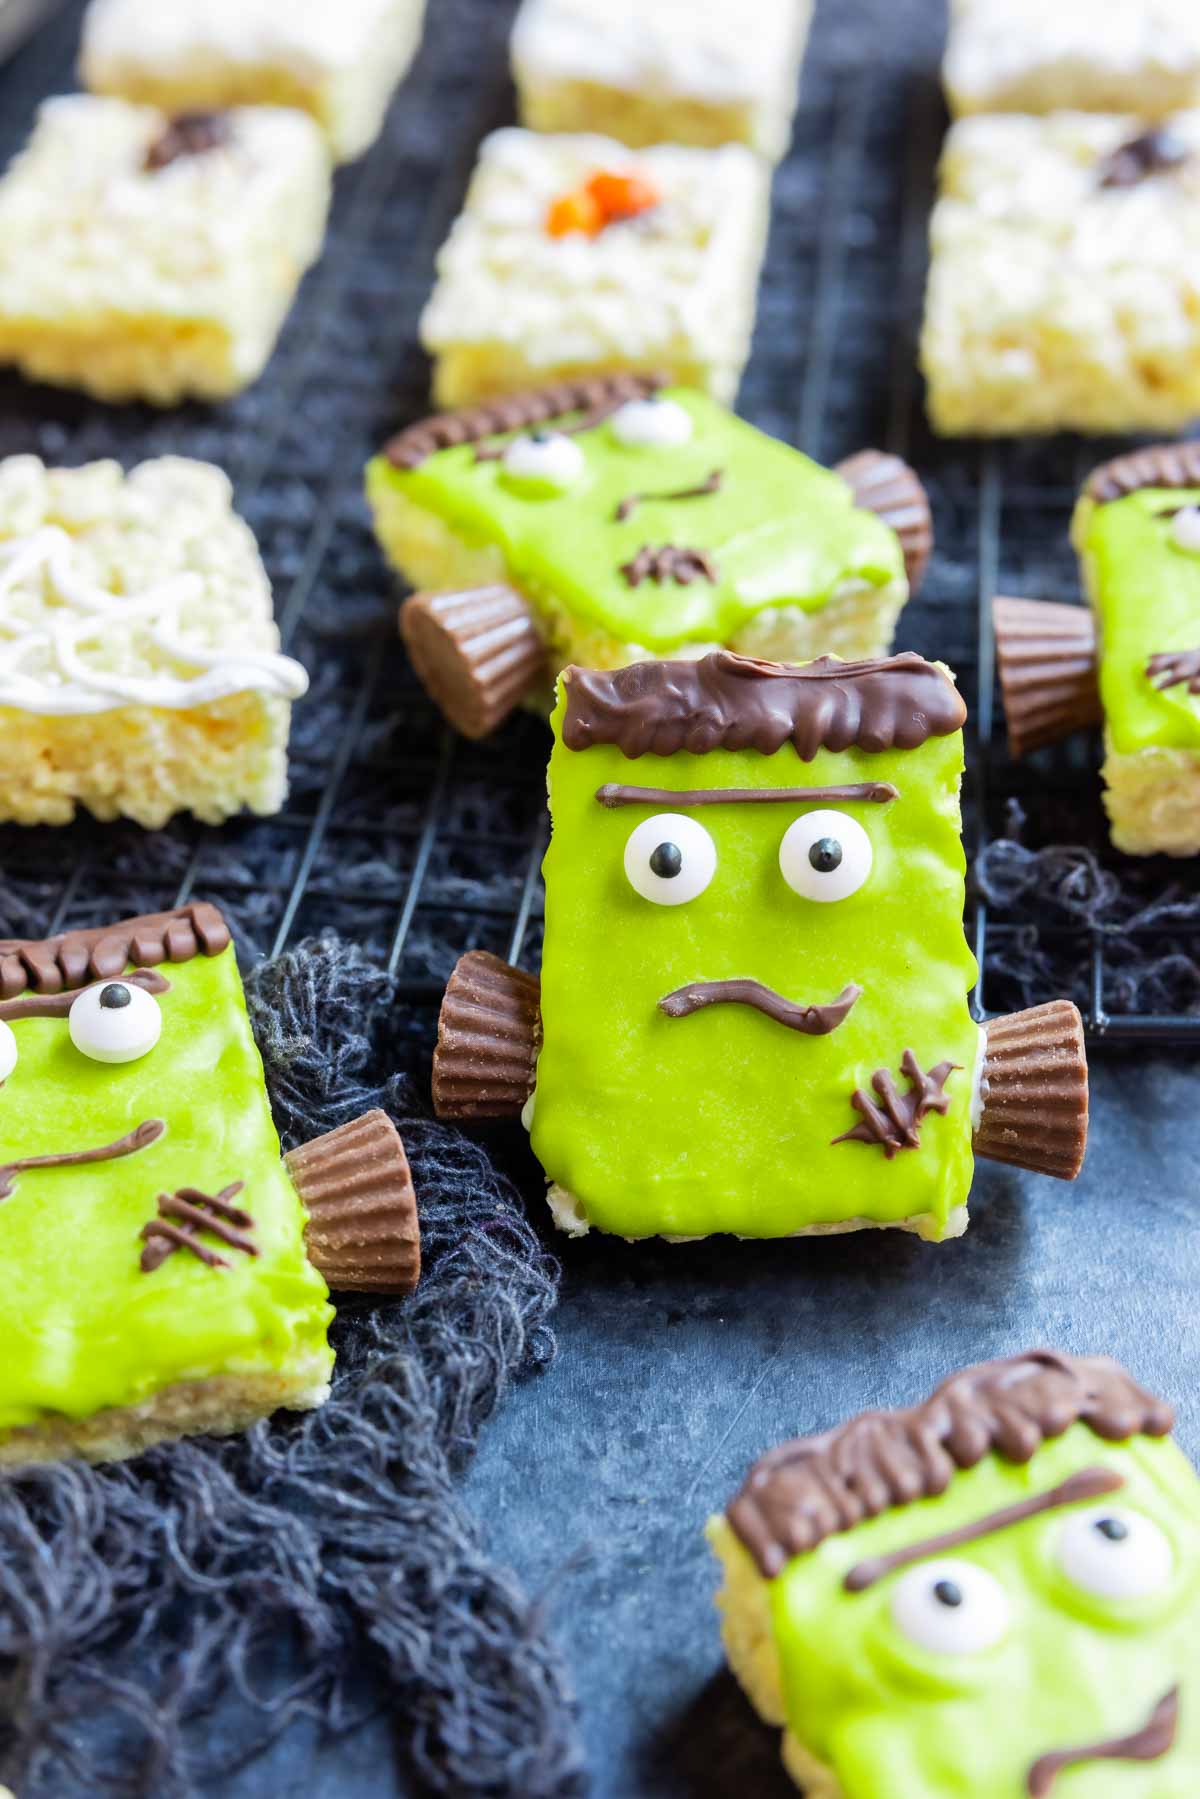 Frankenstein Rice Krispies Treats decorated with colored candy melts